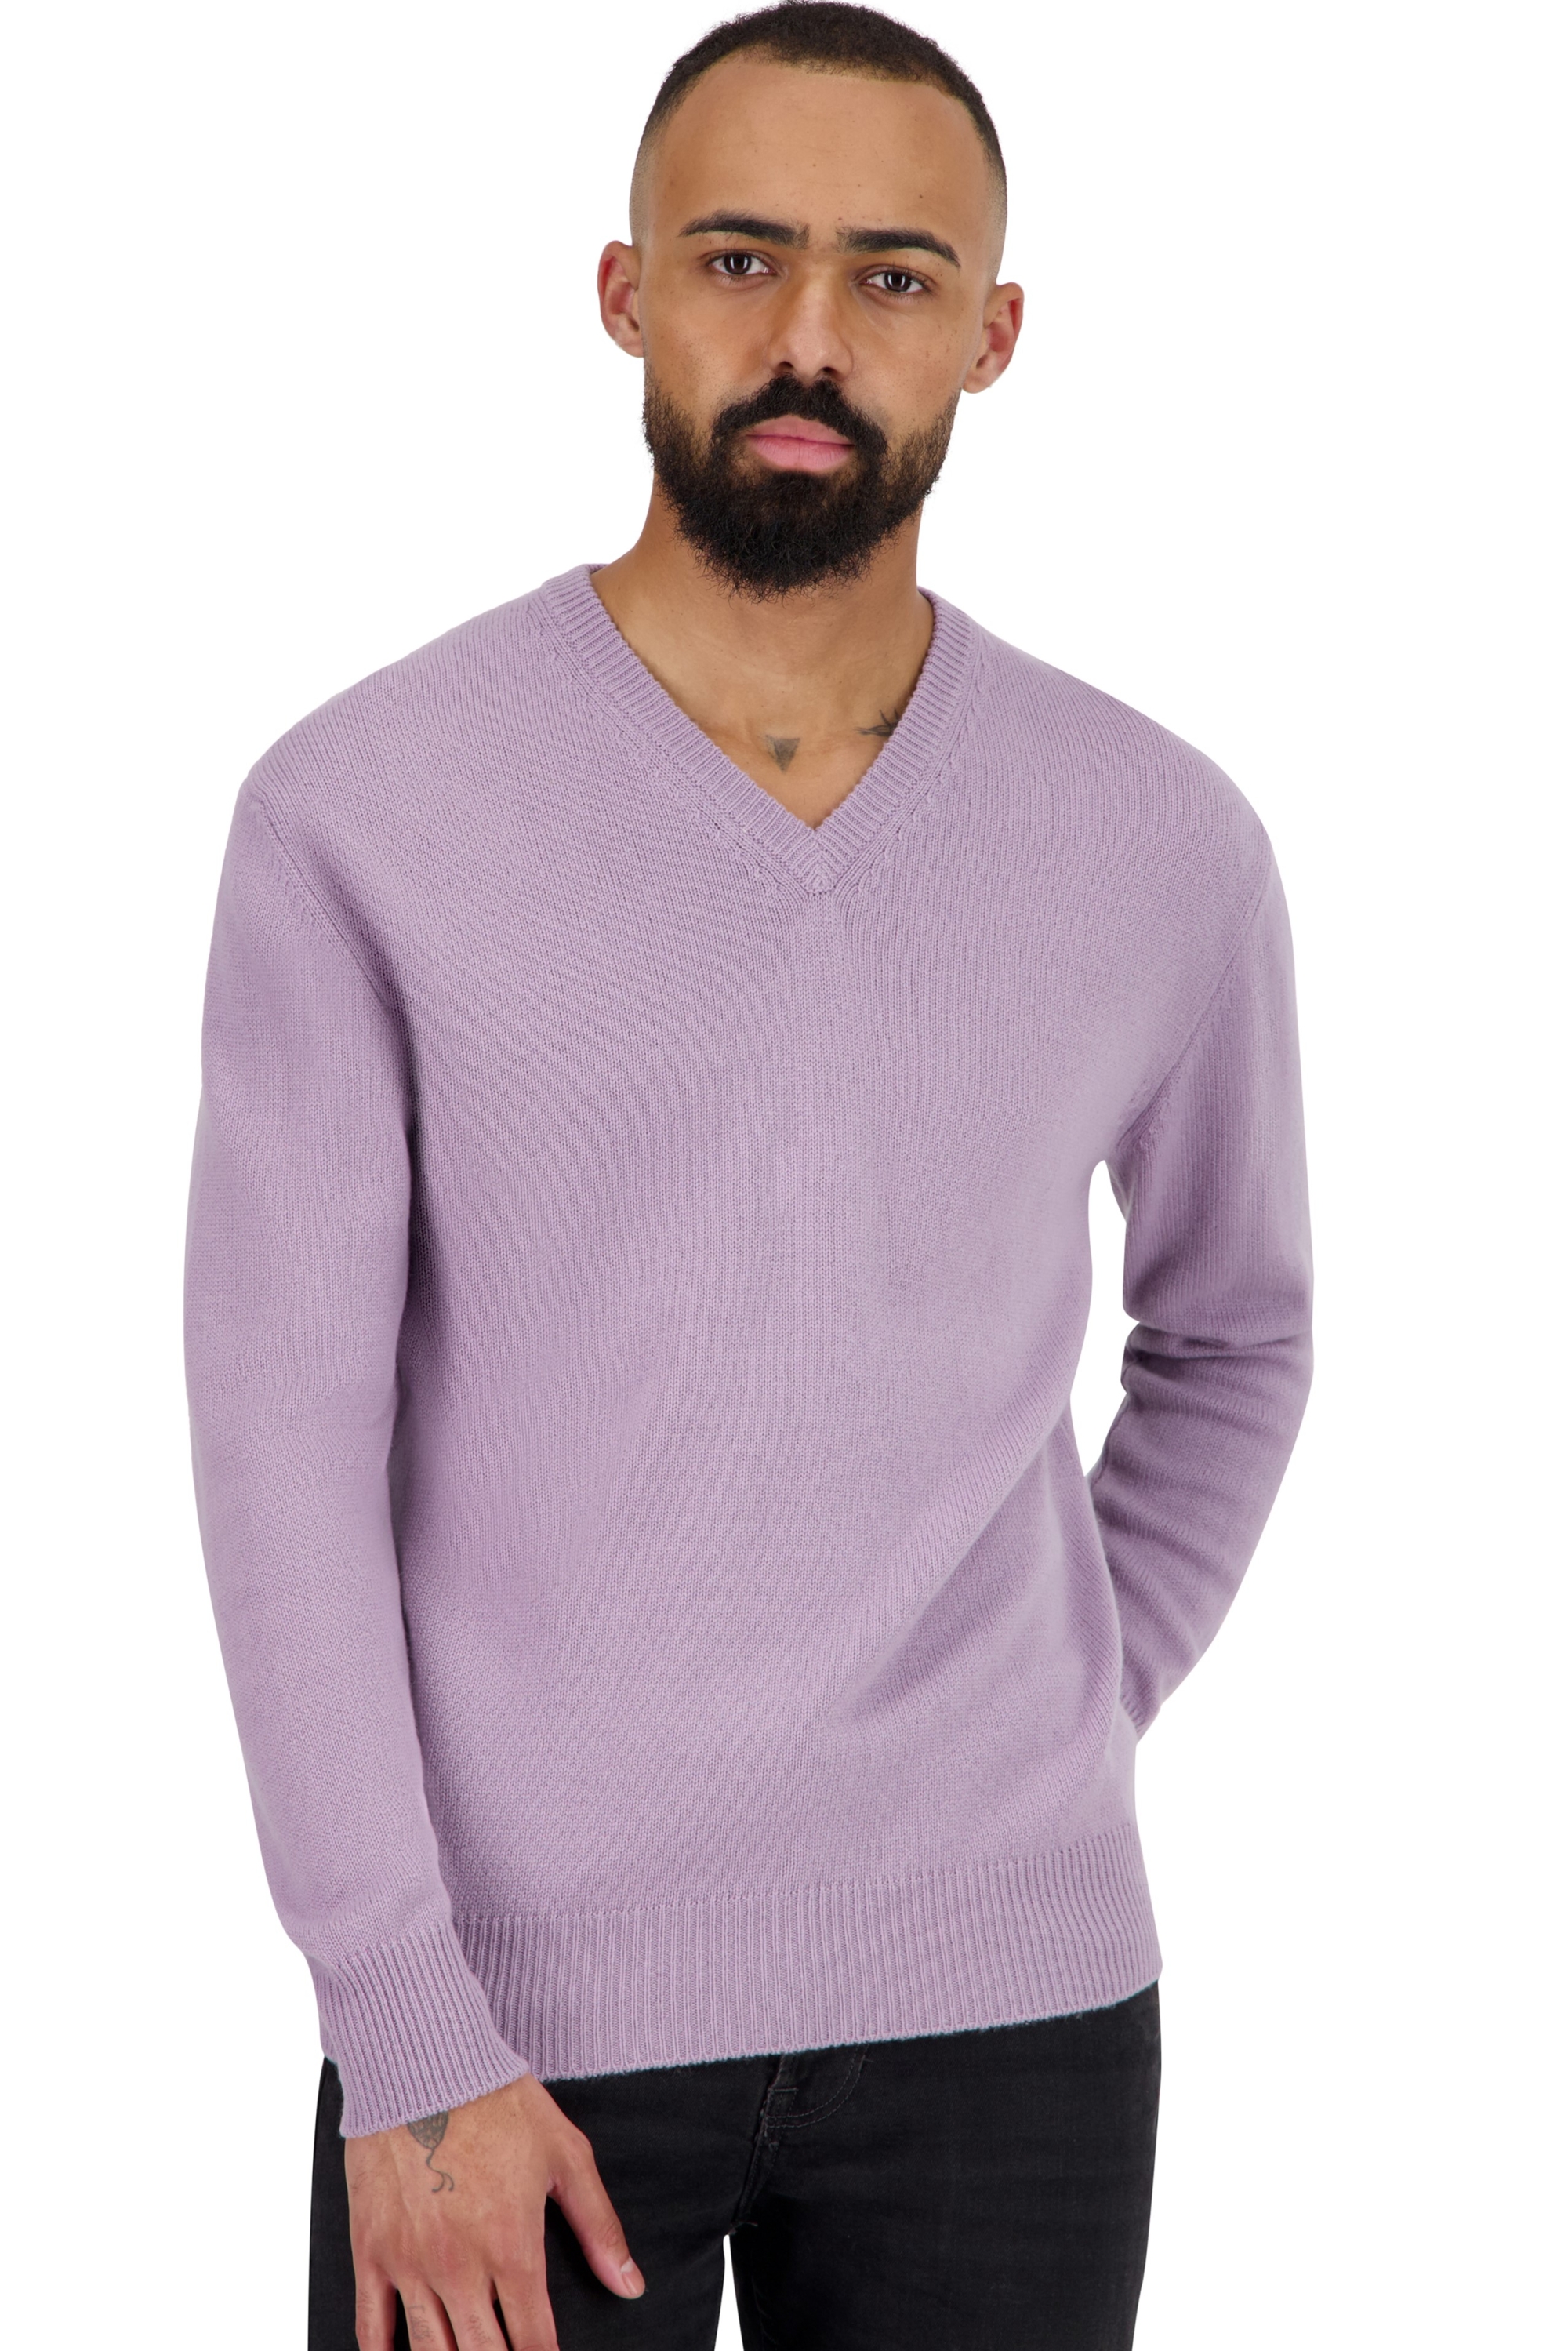 Cashmere men basic sweaters at low prices tour first vintage l